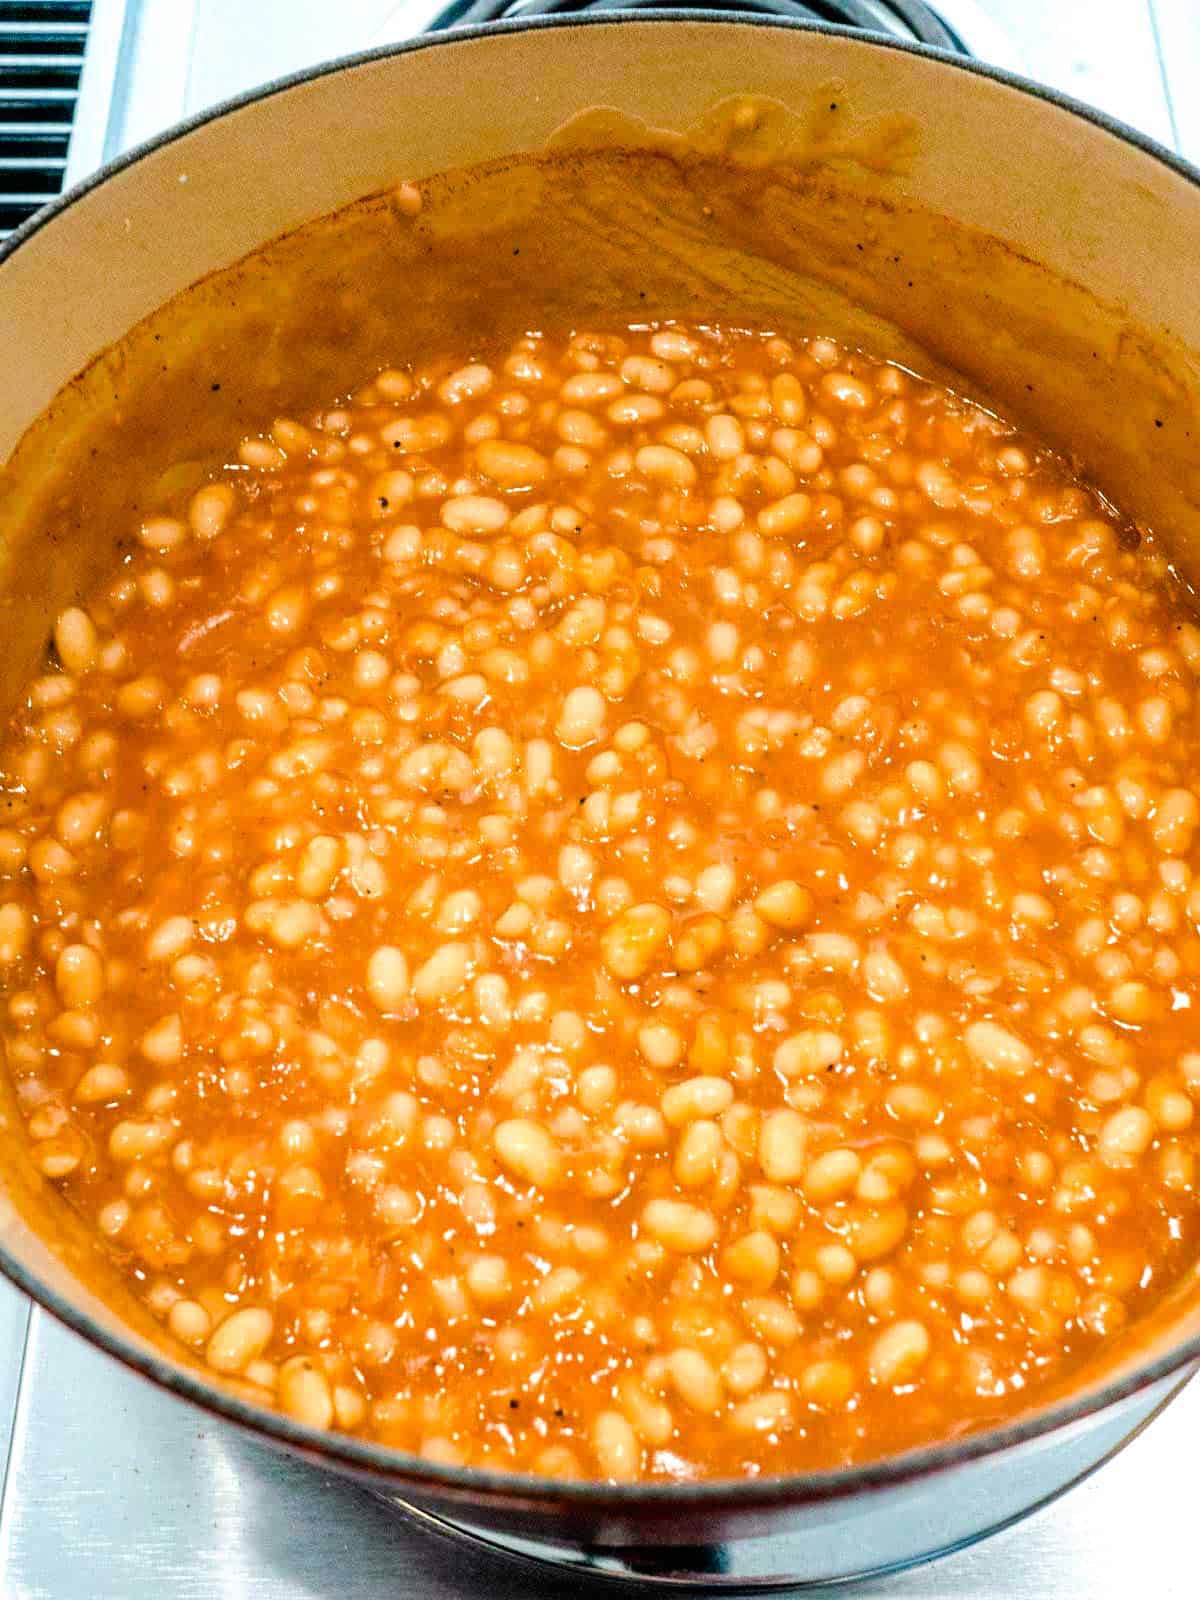 Thickened sauce for the beans.